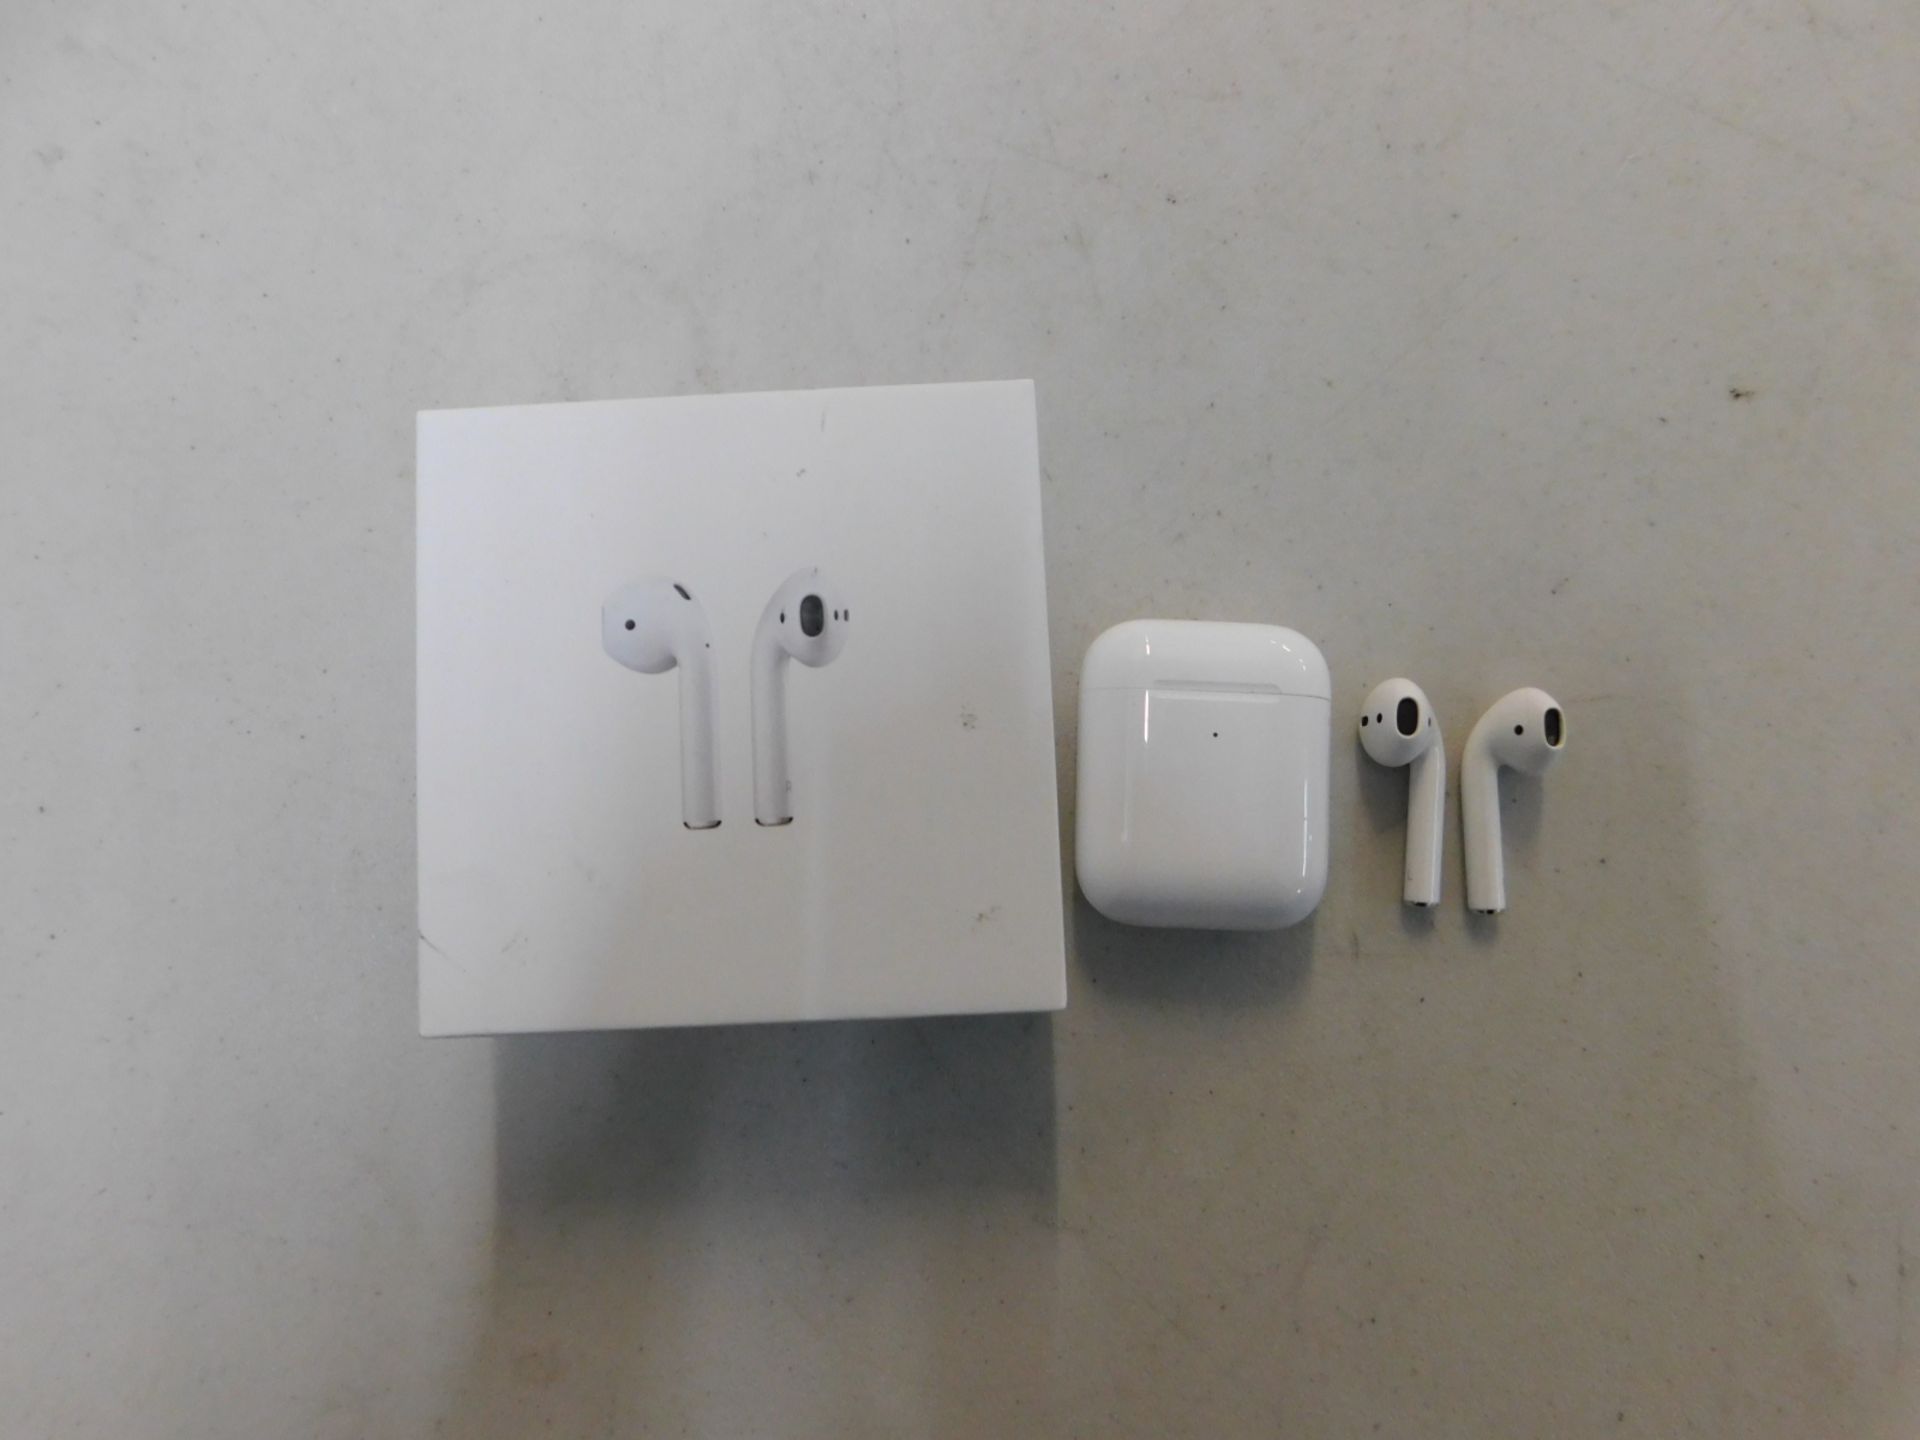 1 BOXED PAIR OF APPLE AIRPODS 2 BLUETOOTH EARPHONES WITH WIRELESS CHARGING CASE RRP Â£199.99